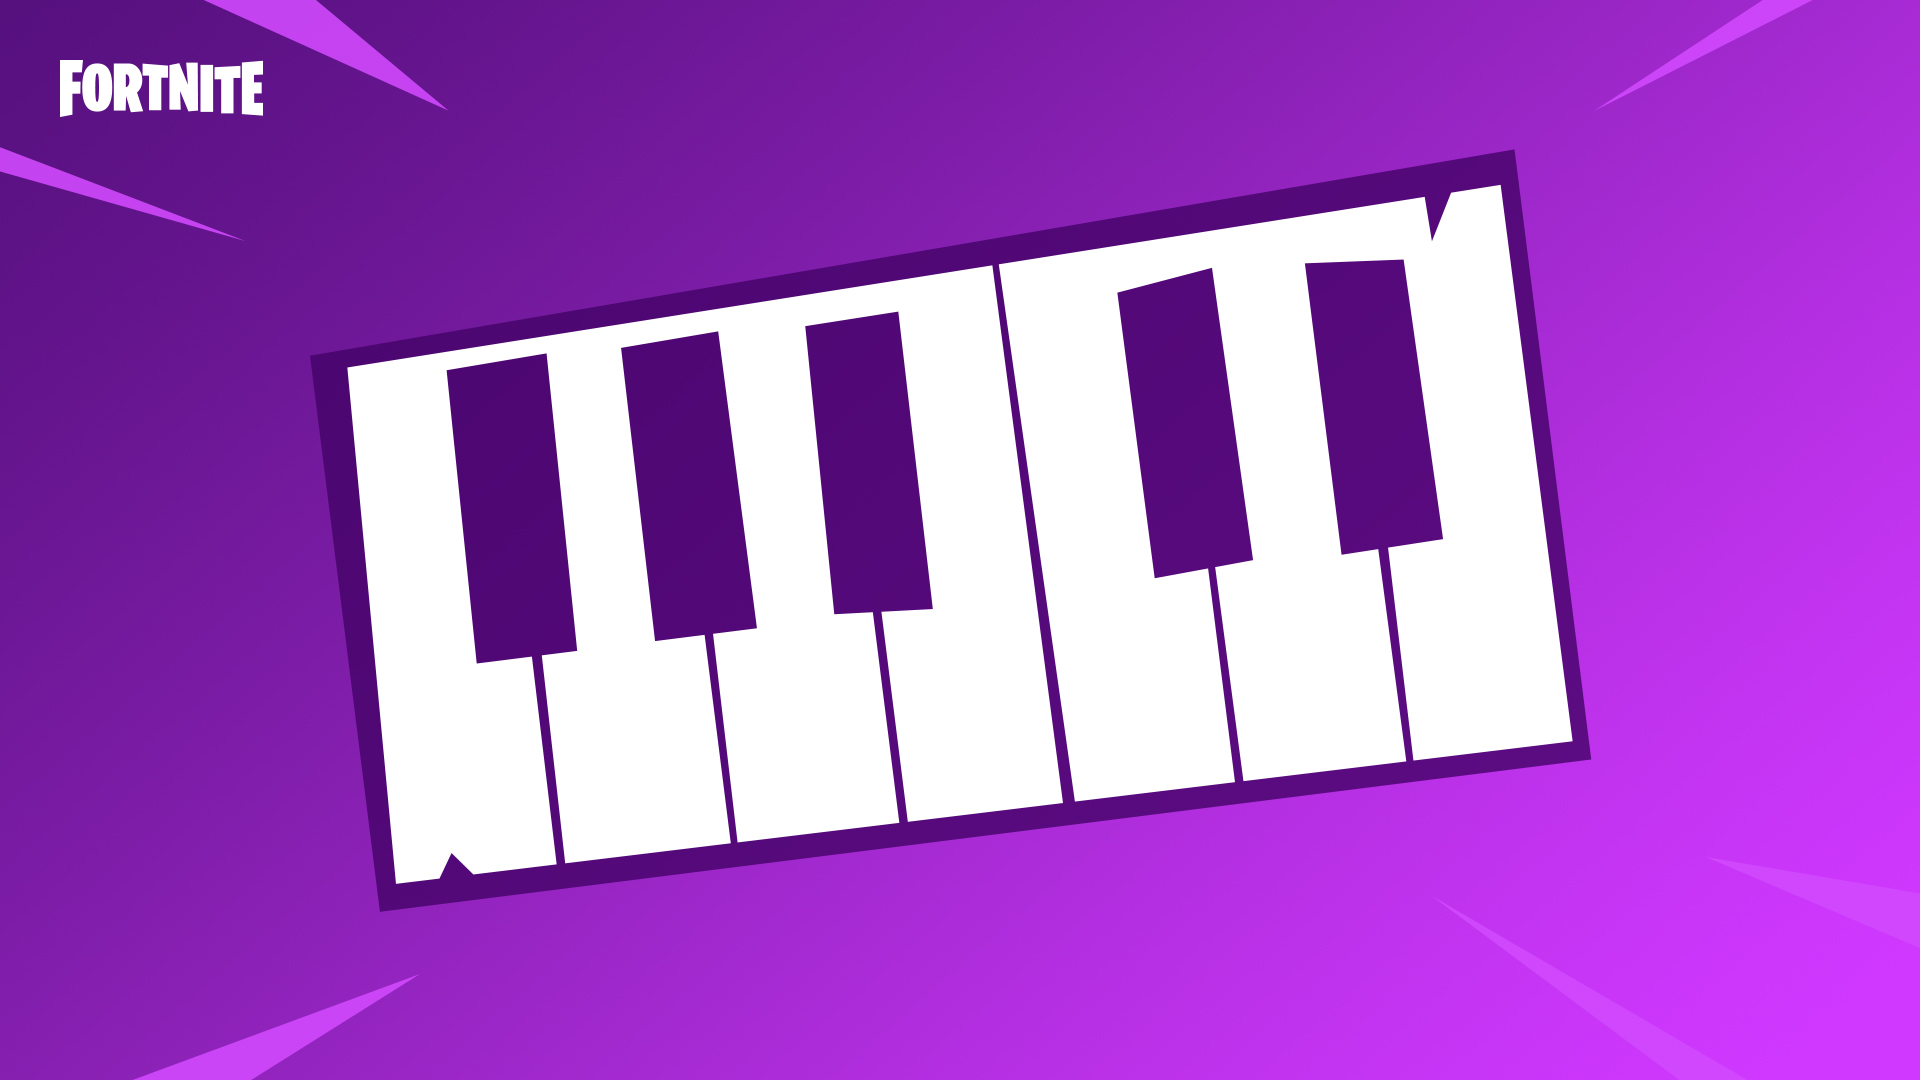 fortnite creative mode v7 30 music sequencer more prefabs and more options fortnite news and statistics ss1 - where are the two pianos in fortnite